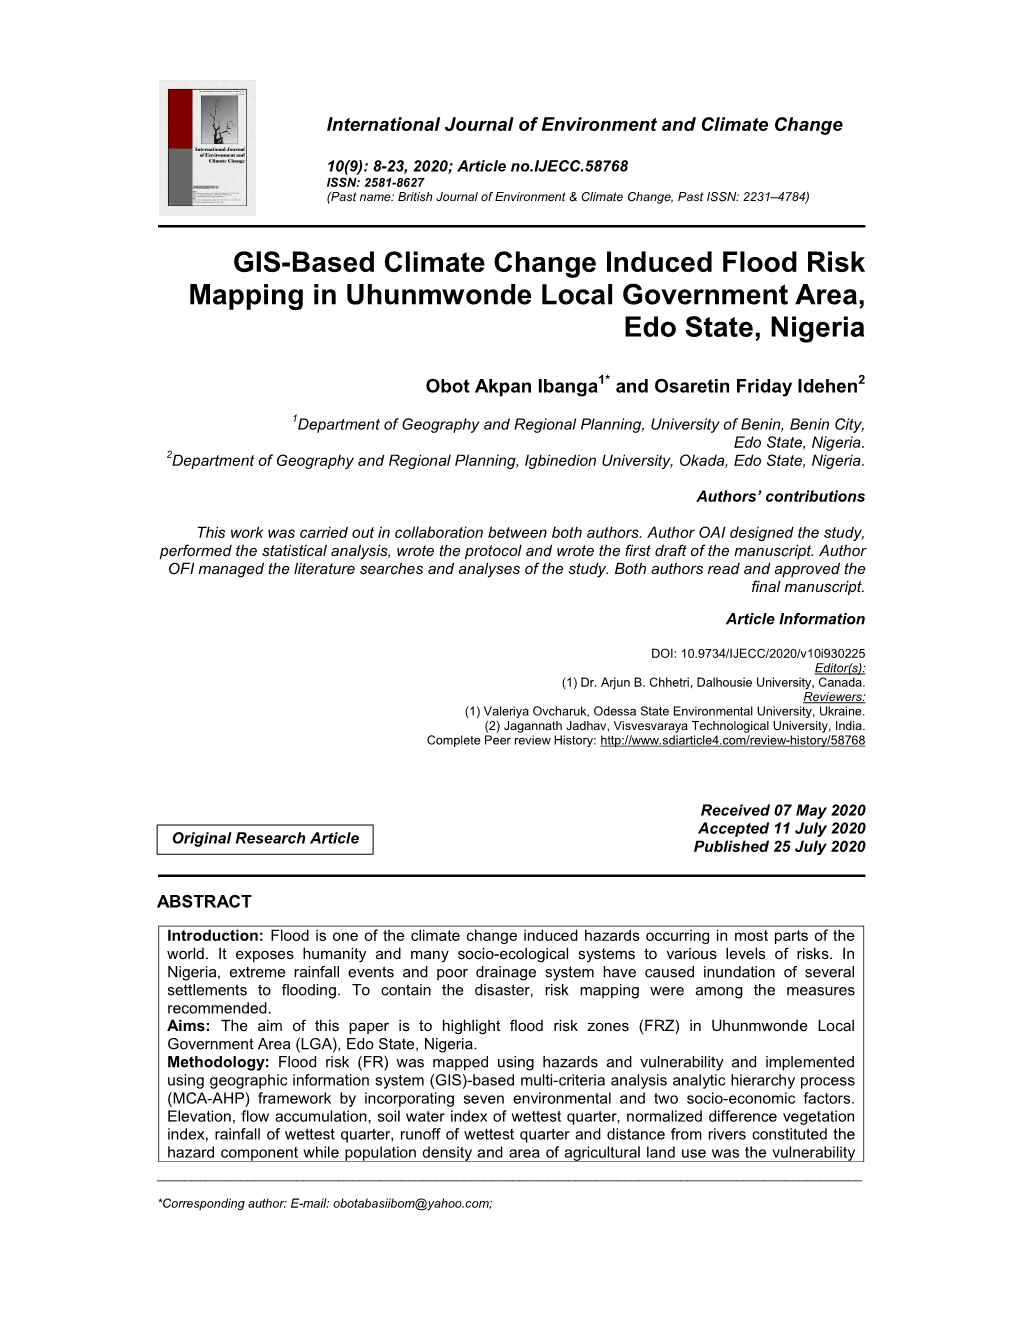 GIS-Based Climate Change Induced Flood Risk Mapping in Uhunmwonde Local Government Area, Edo State, Nigeria